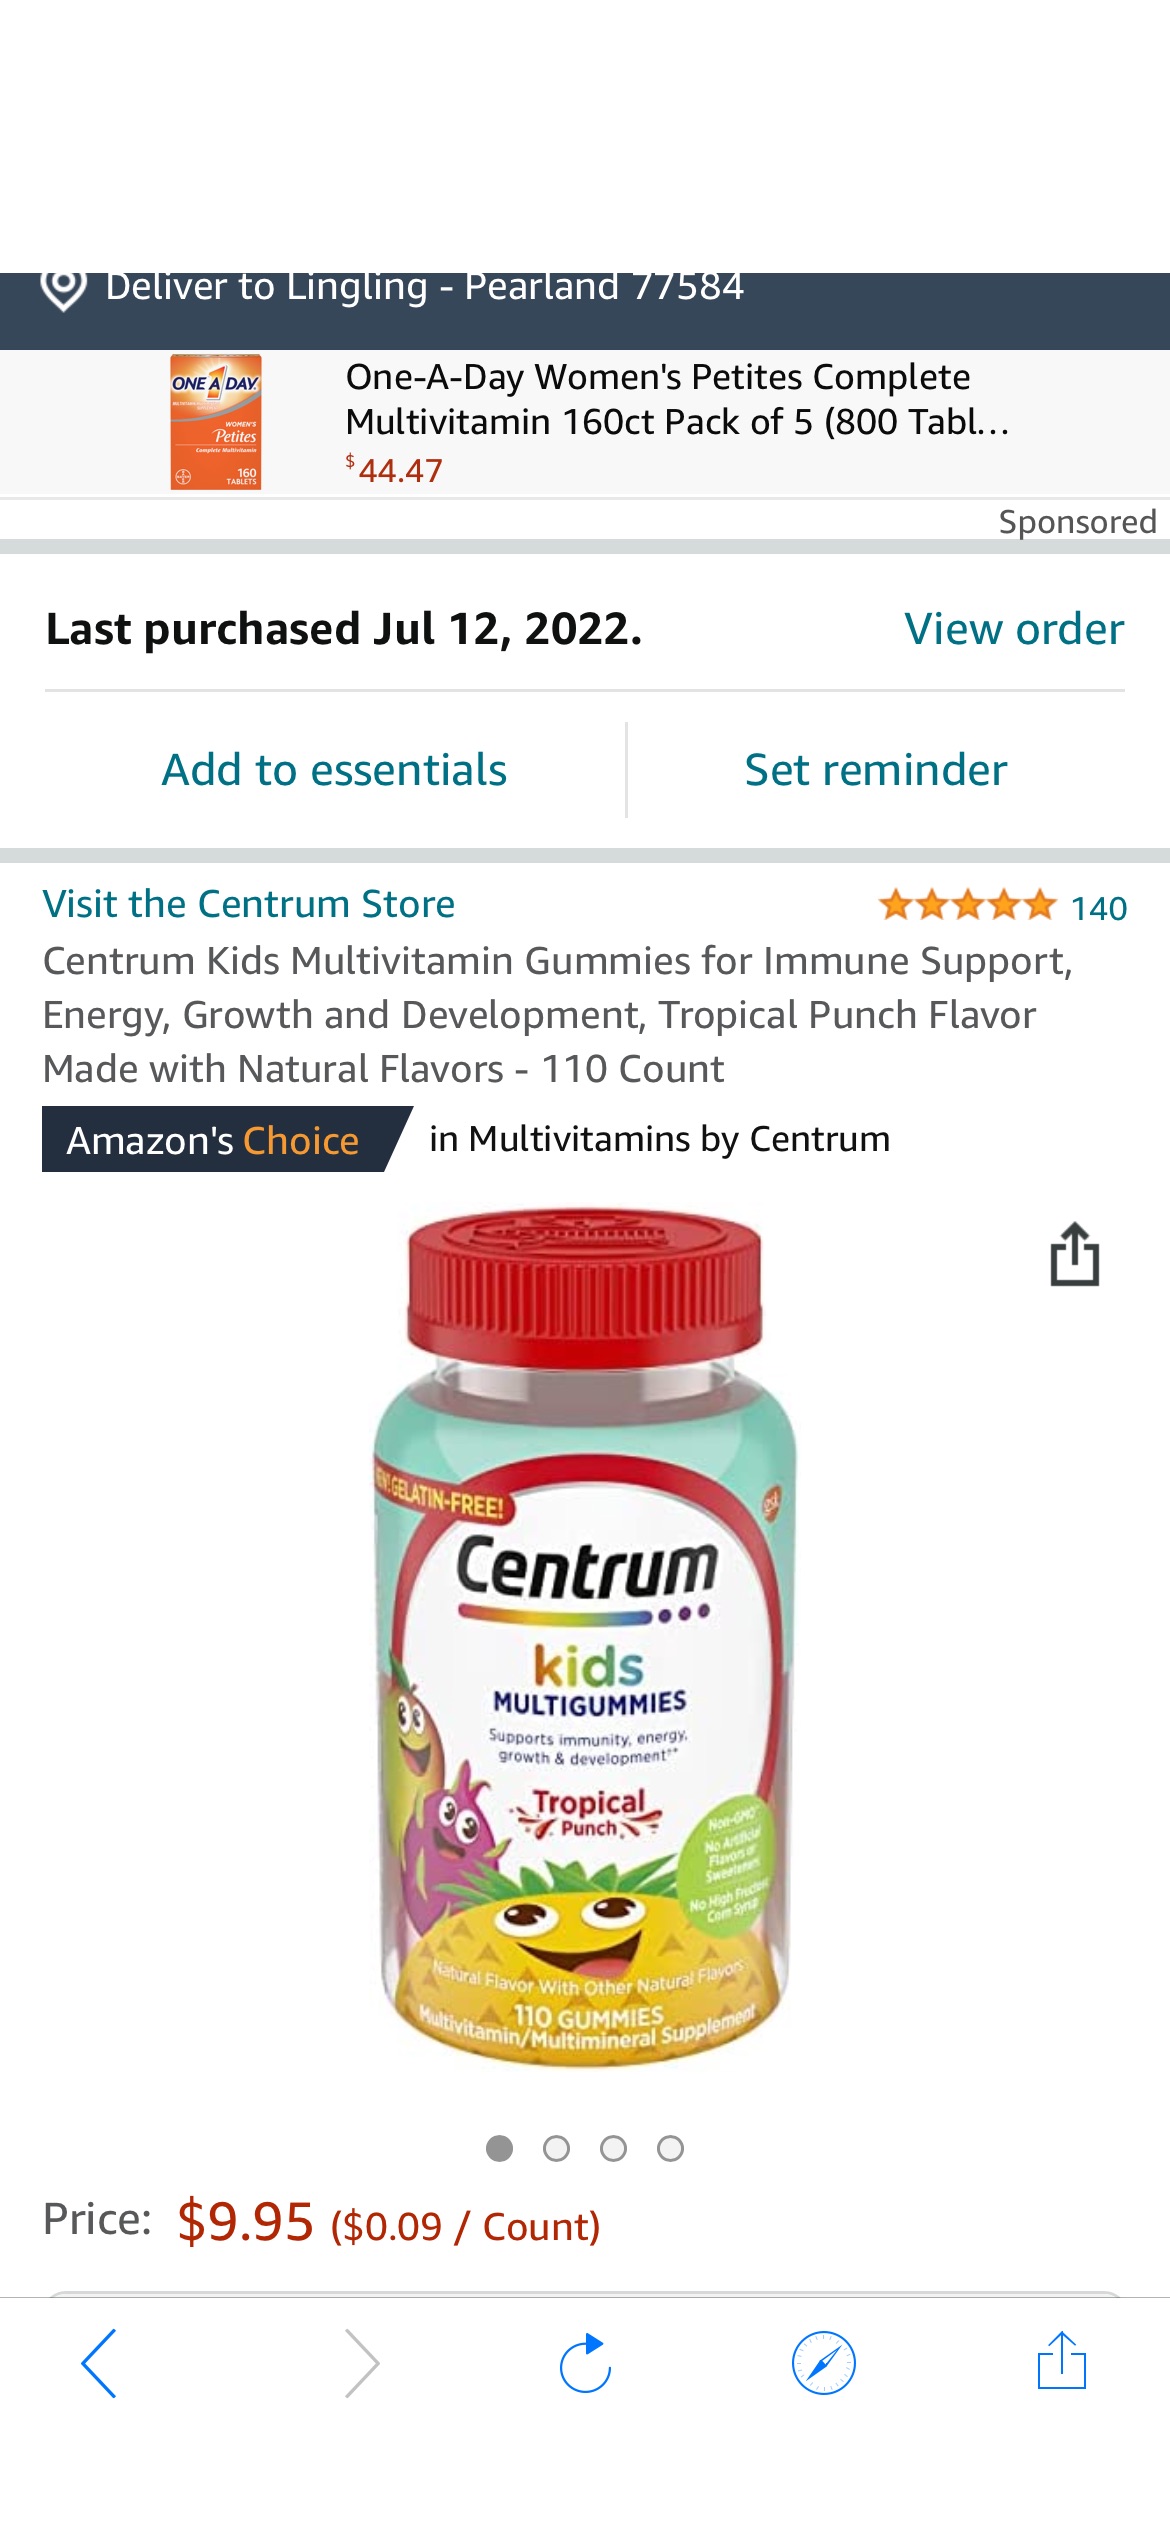 Amazon.com: Centrum Kids Multivitamin Gummies for Immune Support, Energy, Growth and Development, Tropical Punch Flavor Made with Natural Flavors - 110 Count : Health & Household